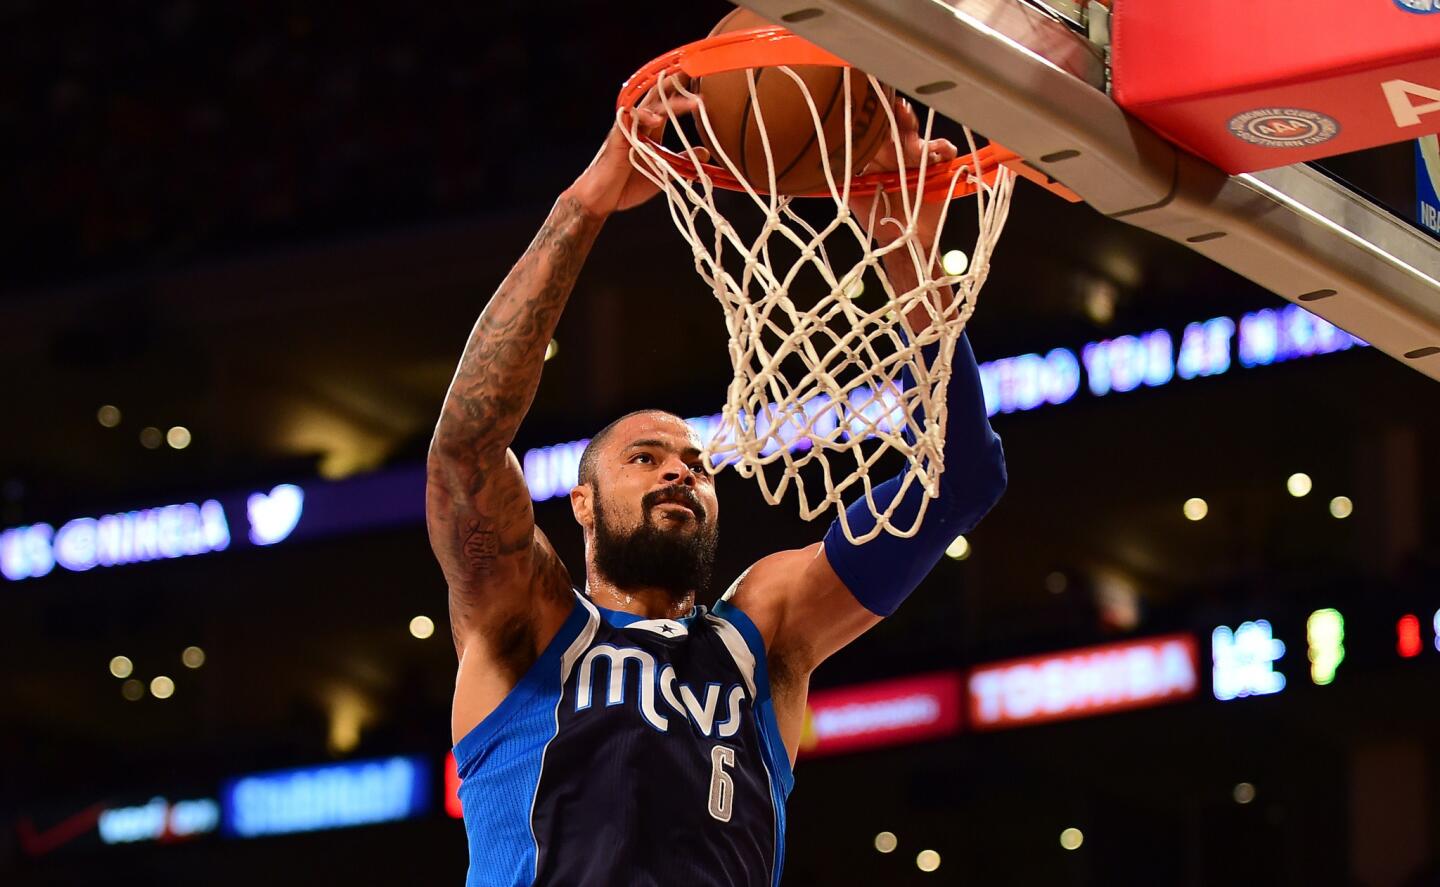 Mavericks center Tyson Chandler throws down a slam dunk in Dallas' 100-93 win over the Lakers.